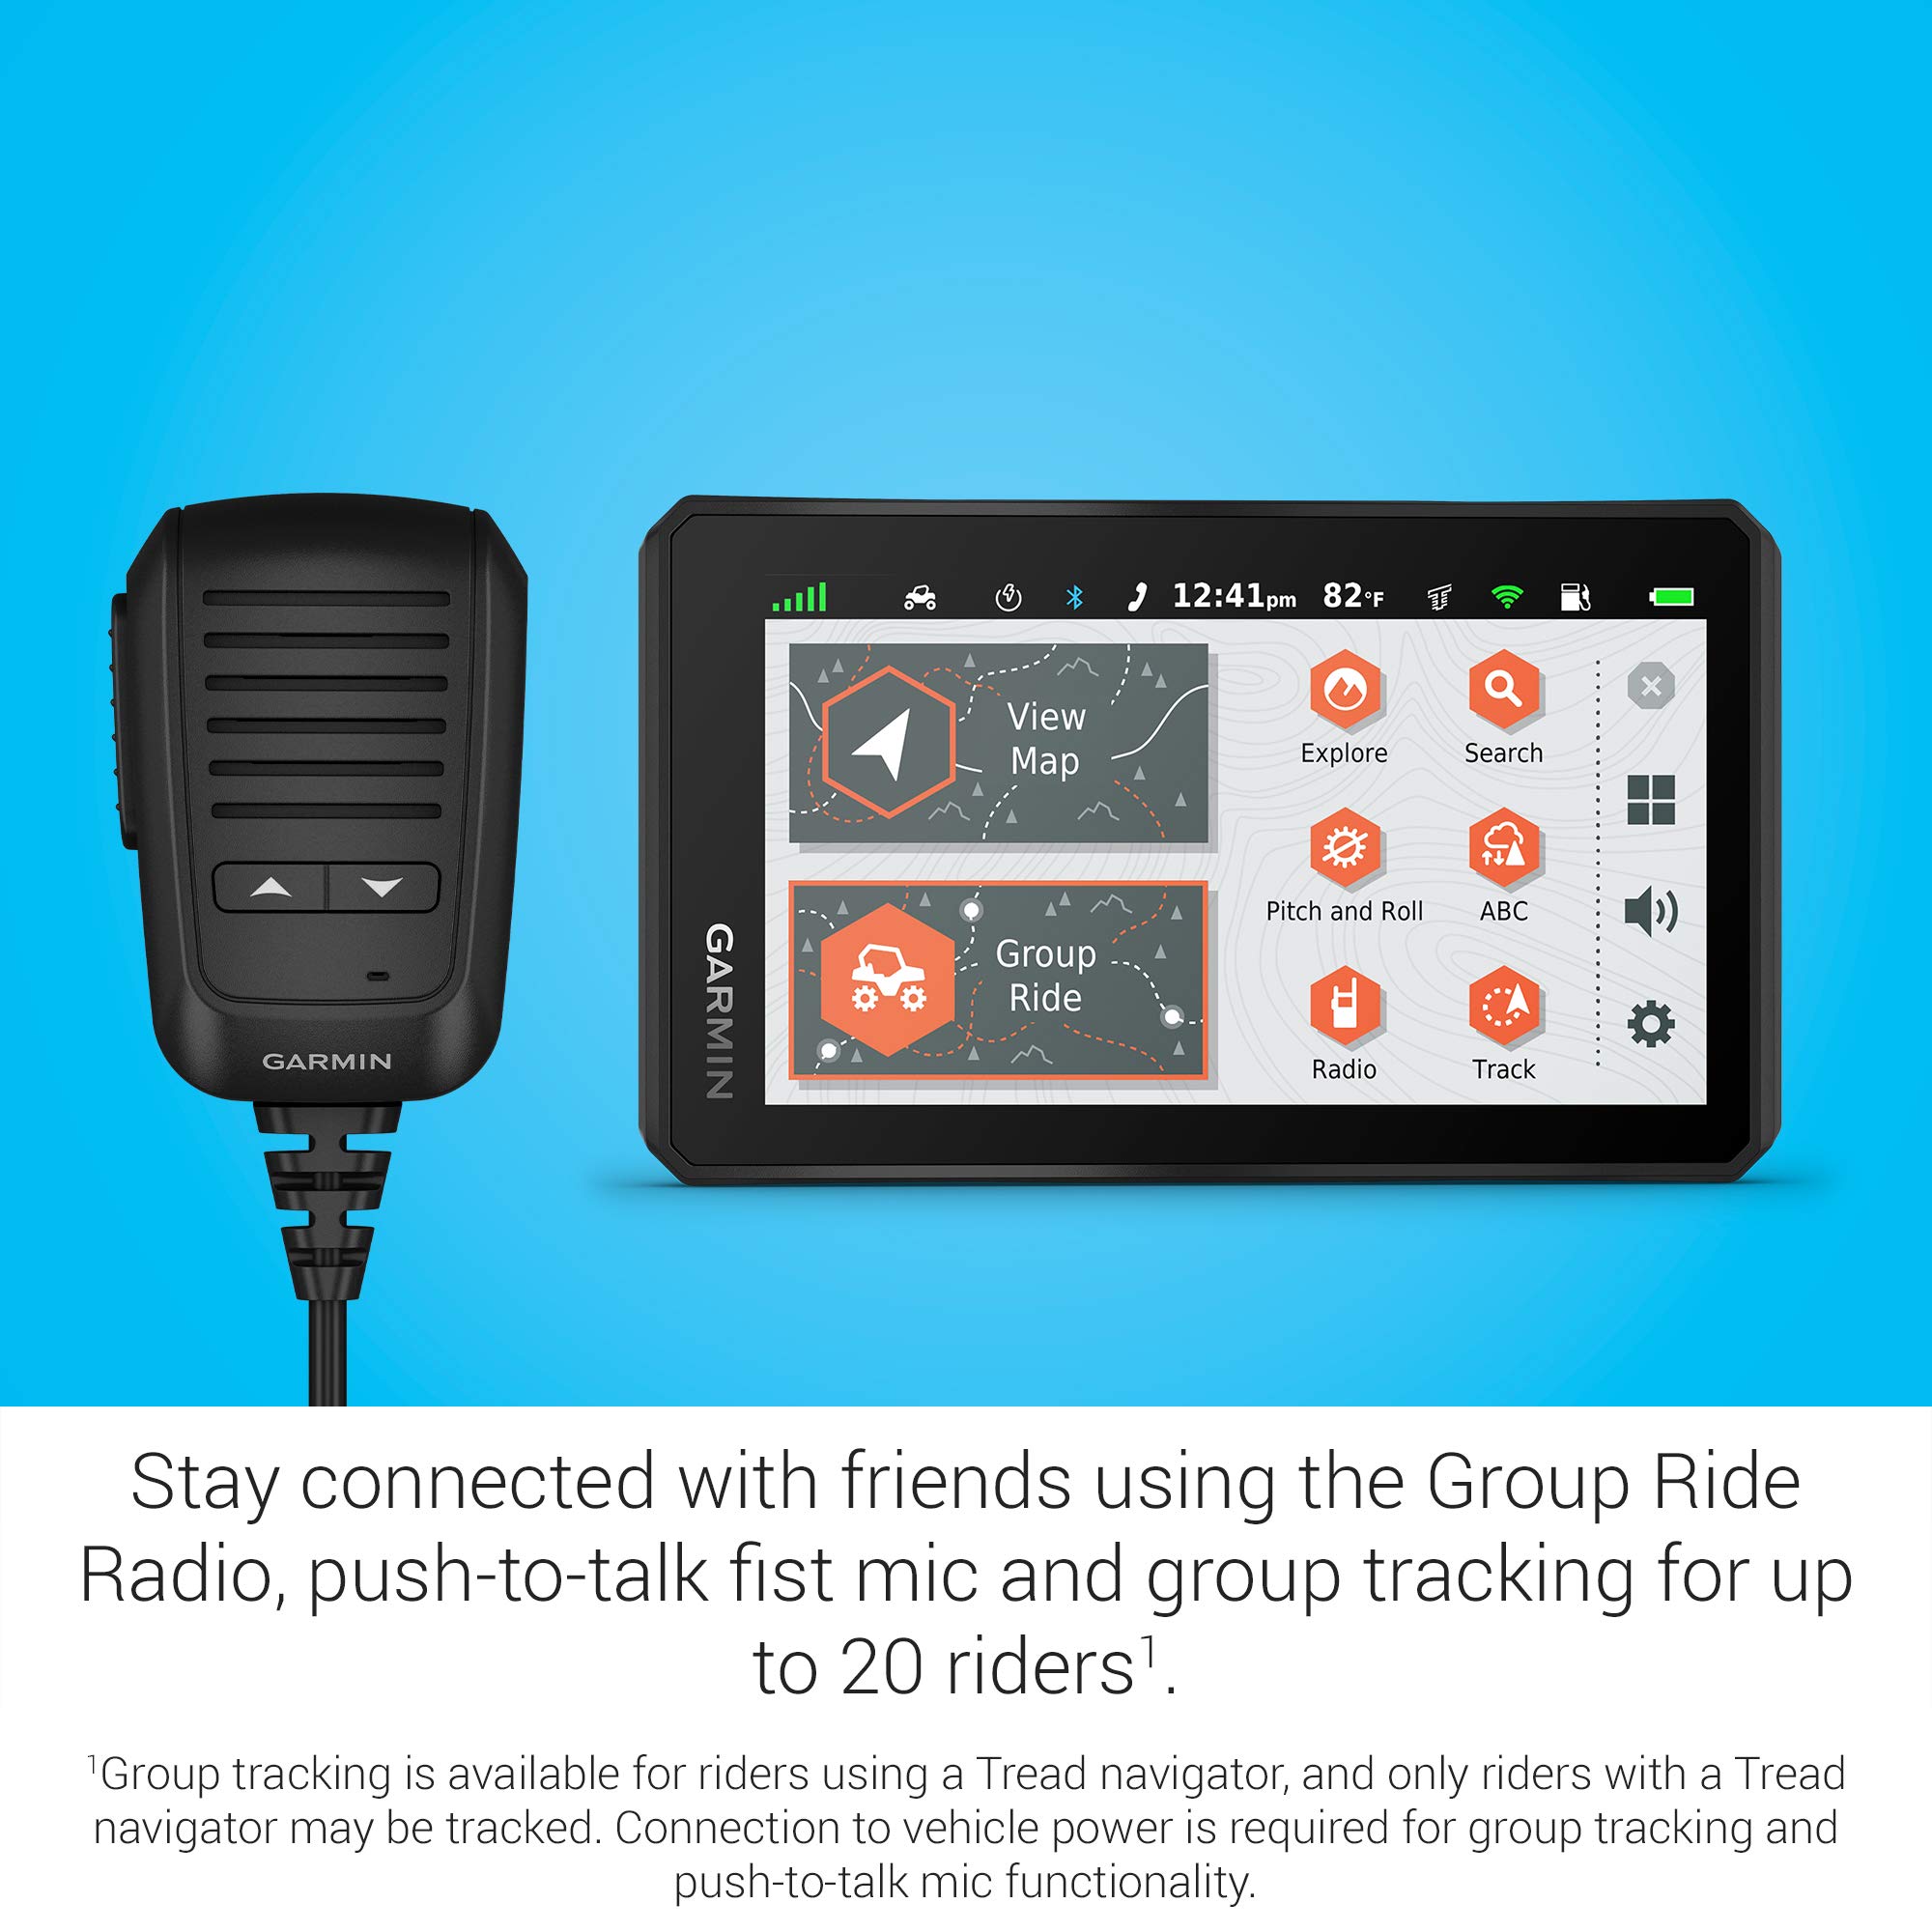 Garmin Tread Powersport Off-Road Navigator with Group Ride Radio, Group Tracking and Voice Communication, 5.5